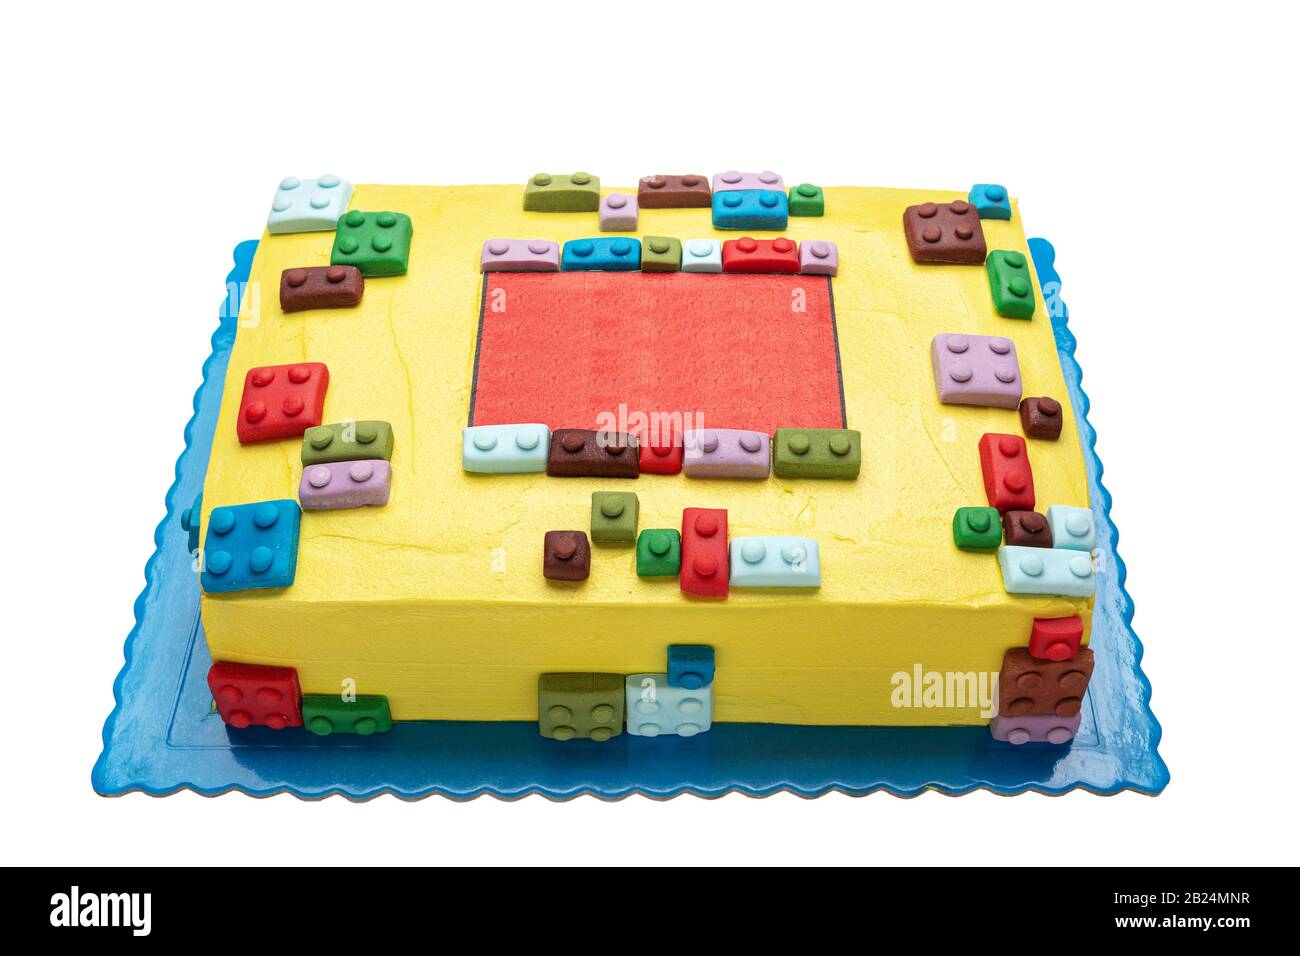 Cake from parts children's designer lego. On a white background for a birthday Stock Photo